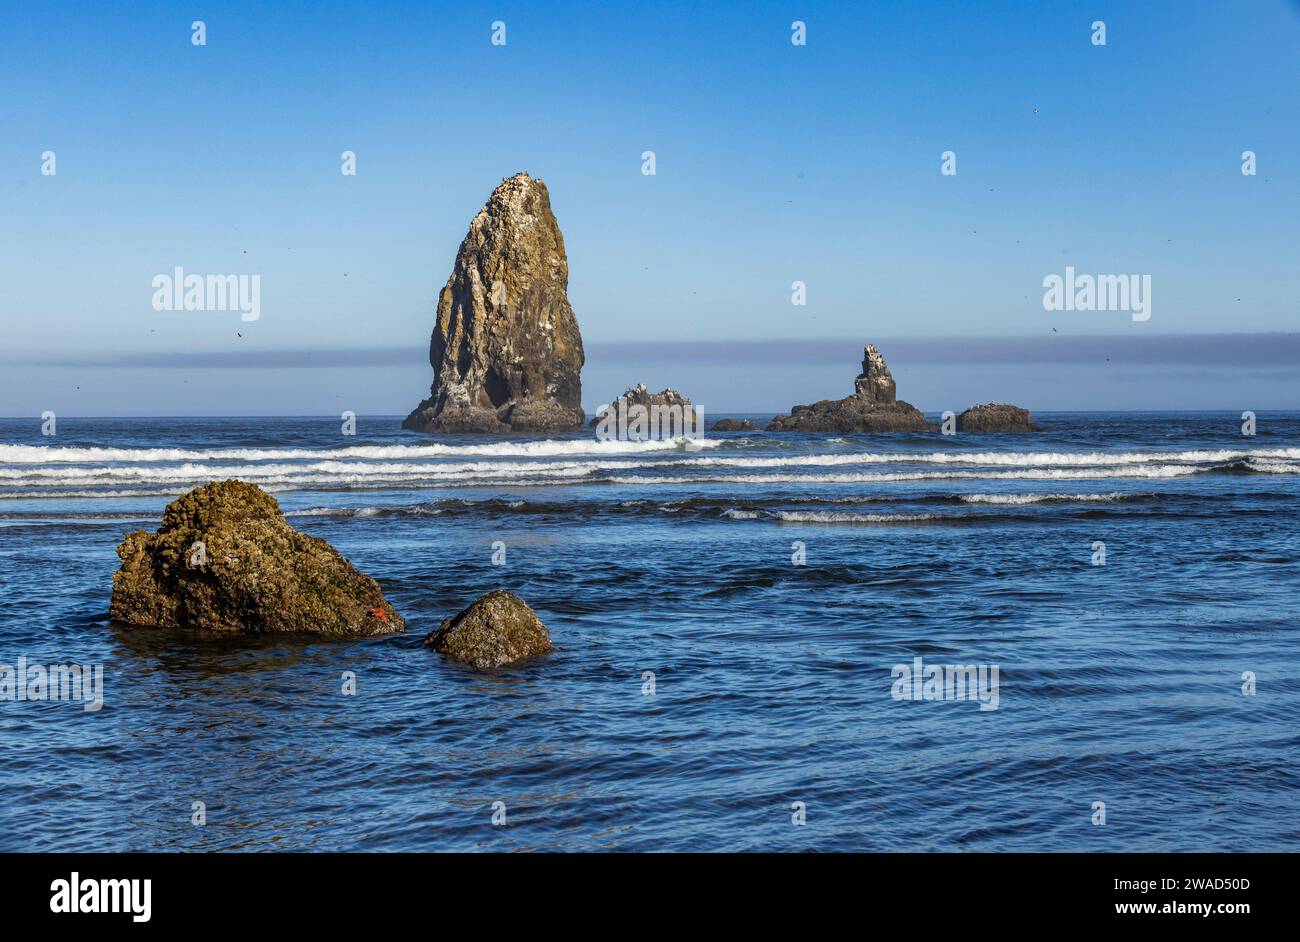 USA, Oregon, Rock formations in ocean at Cannon Beach Stock Photo